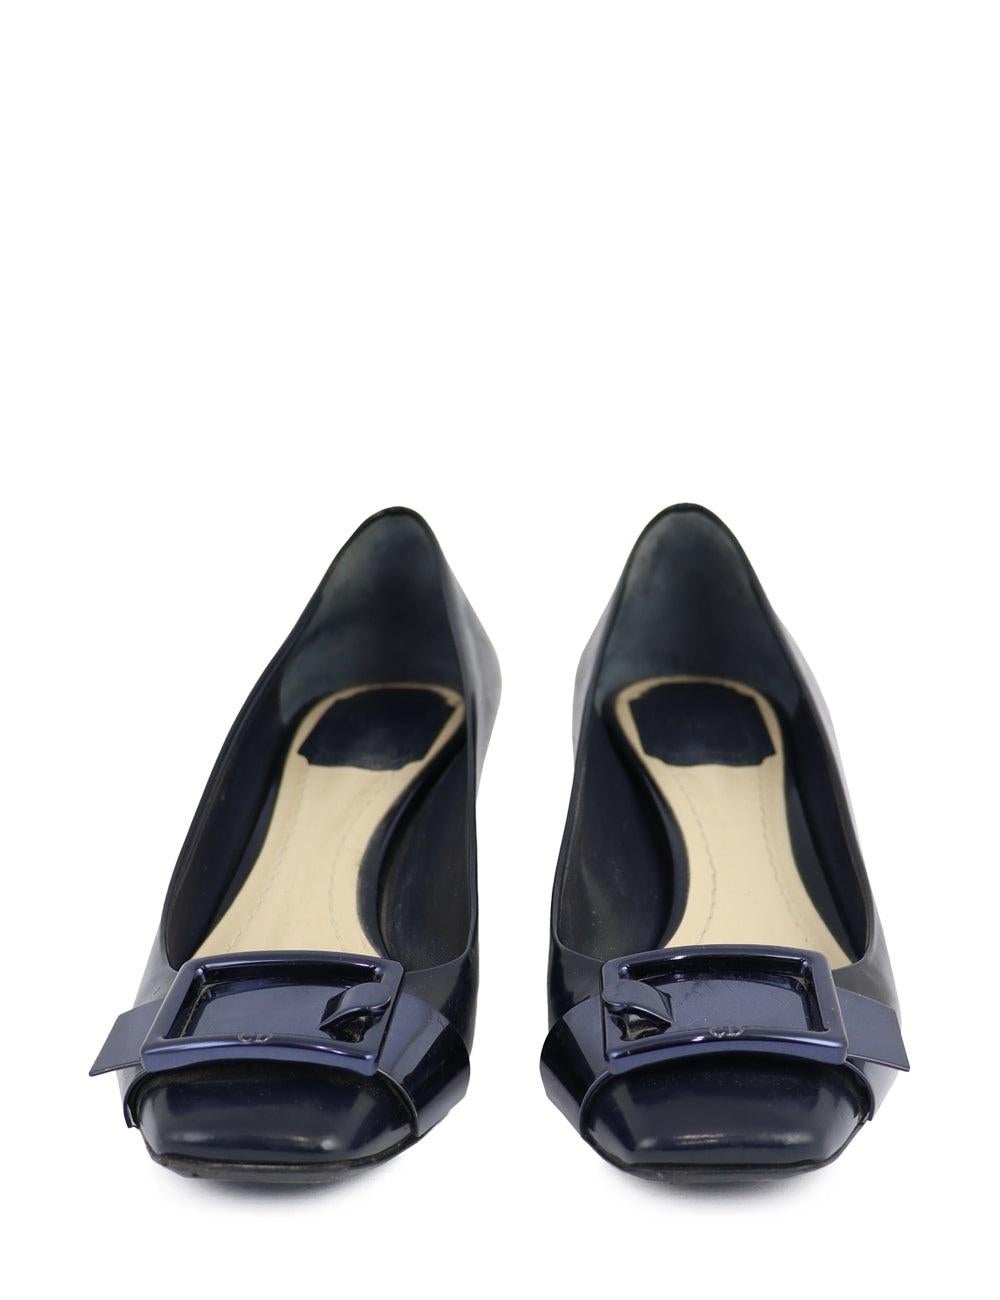 Navy patent leather Christian Dior kitten heels with buckle detail. In excellent condition

Additional information:
Material: Leather
Size: EU 37.5
Measurments: Heel Height: 4 cm
Overall Condition: Good
Interior Condition: Signs of wear
Exterior